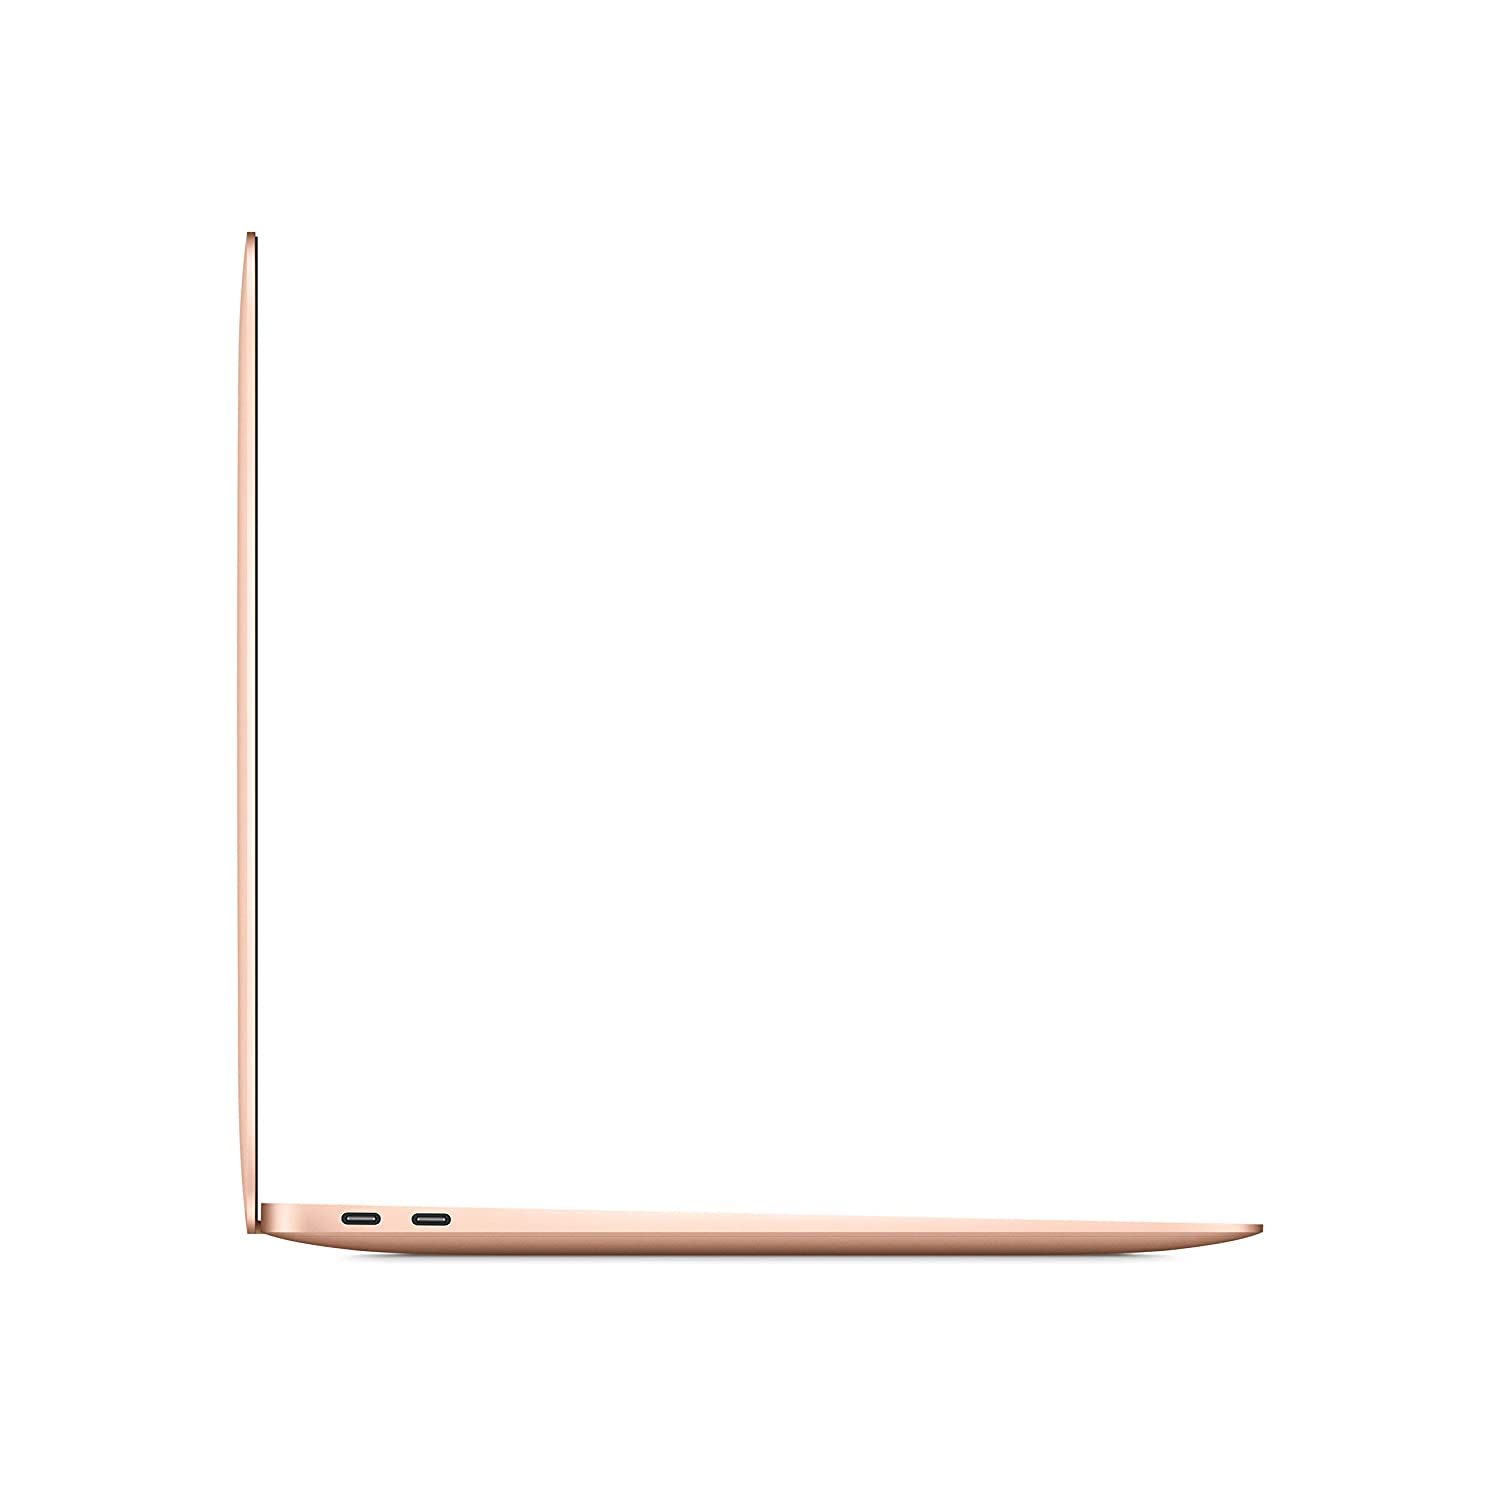 New Apple MacBook Air with Apple M1 Chip (13-inch, 8GB RAM, 256GB SSD) - Gold (Latest Model)